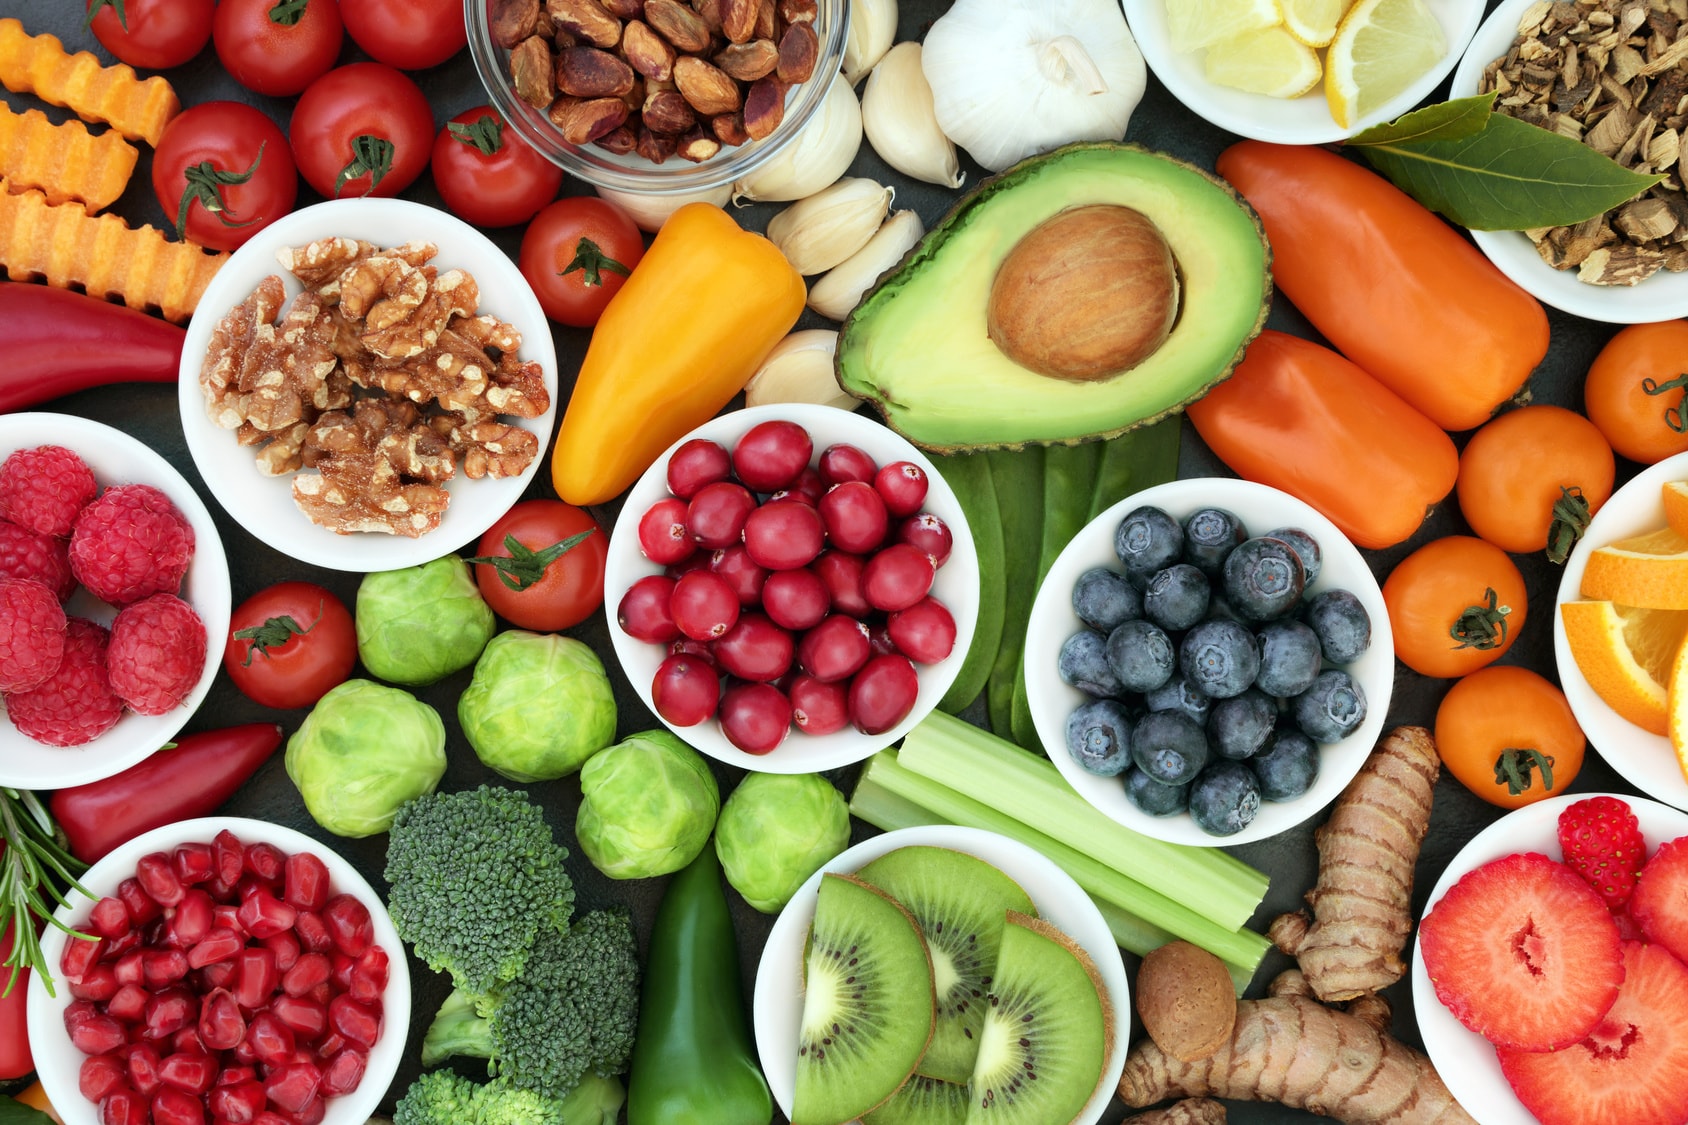 Image of various healthy foods.